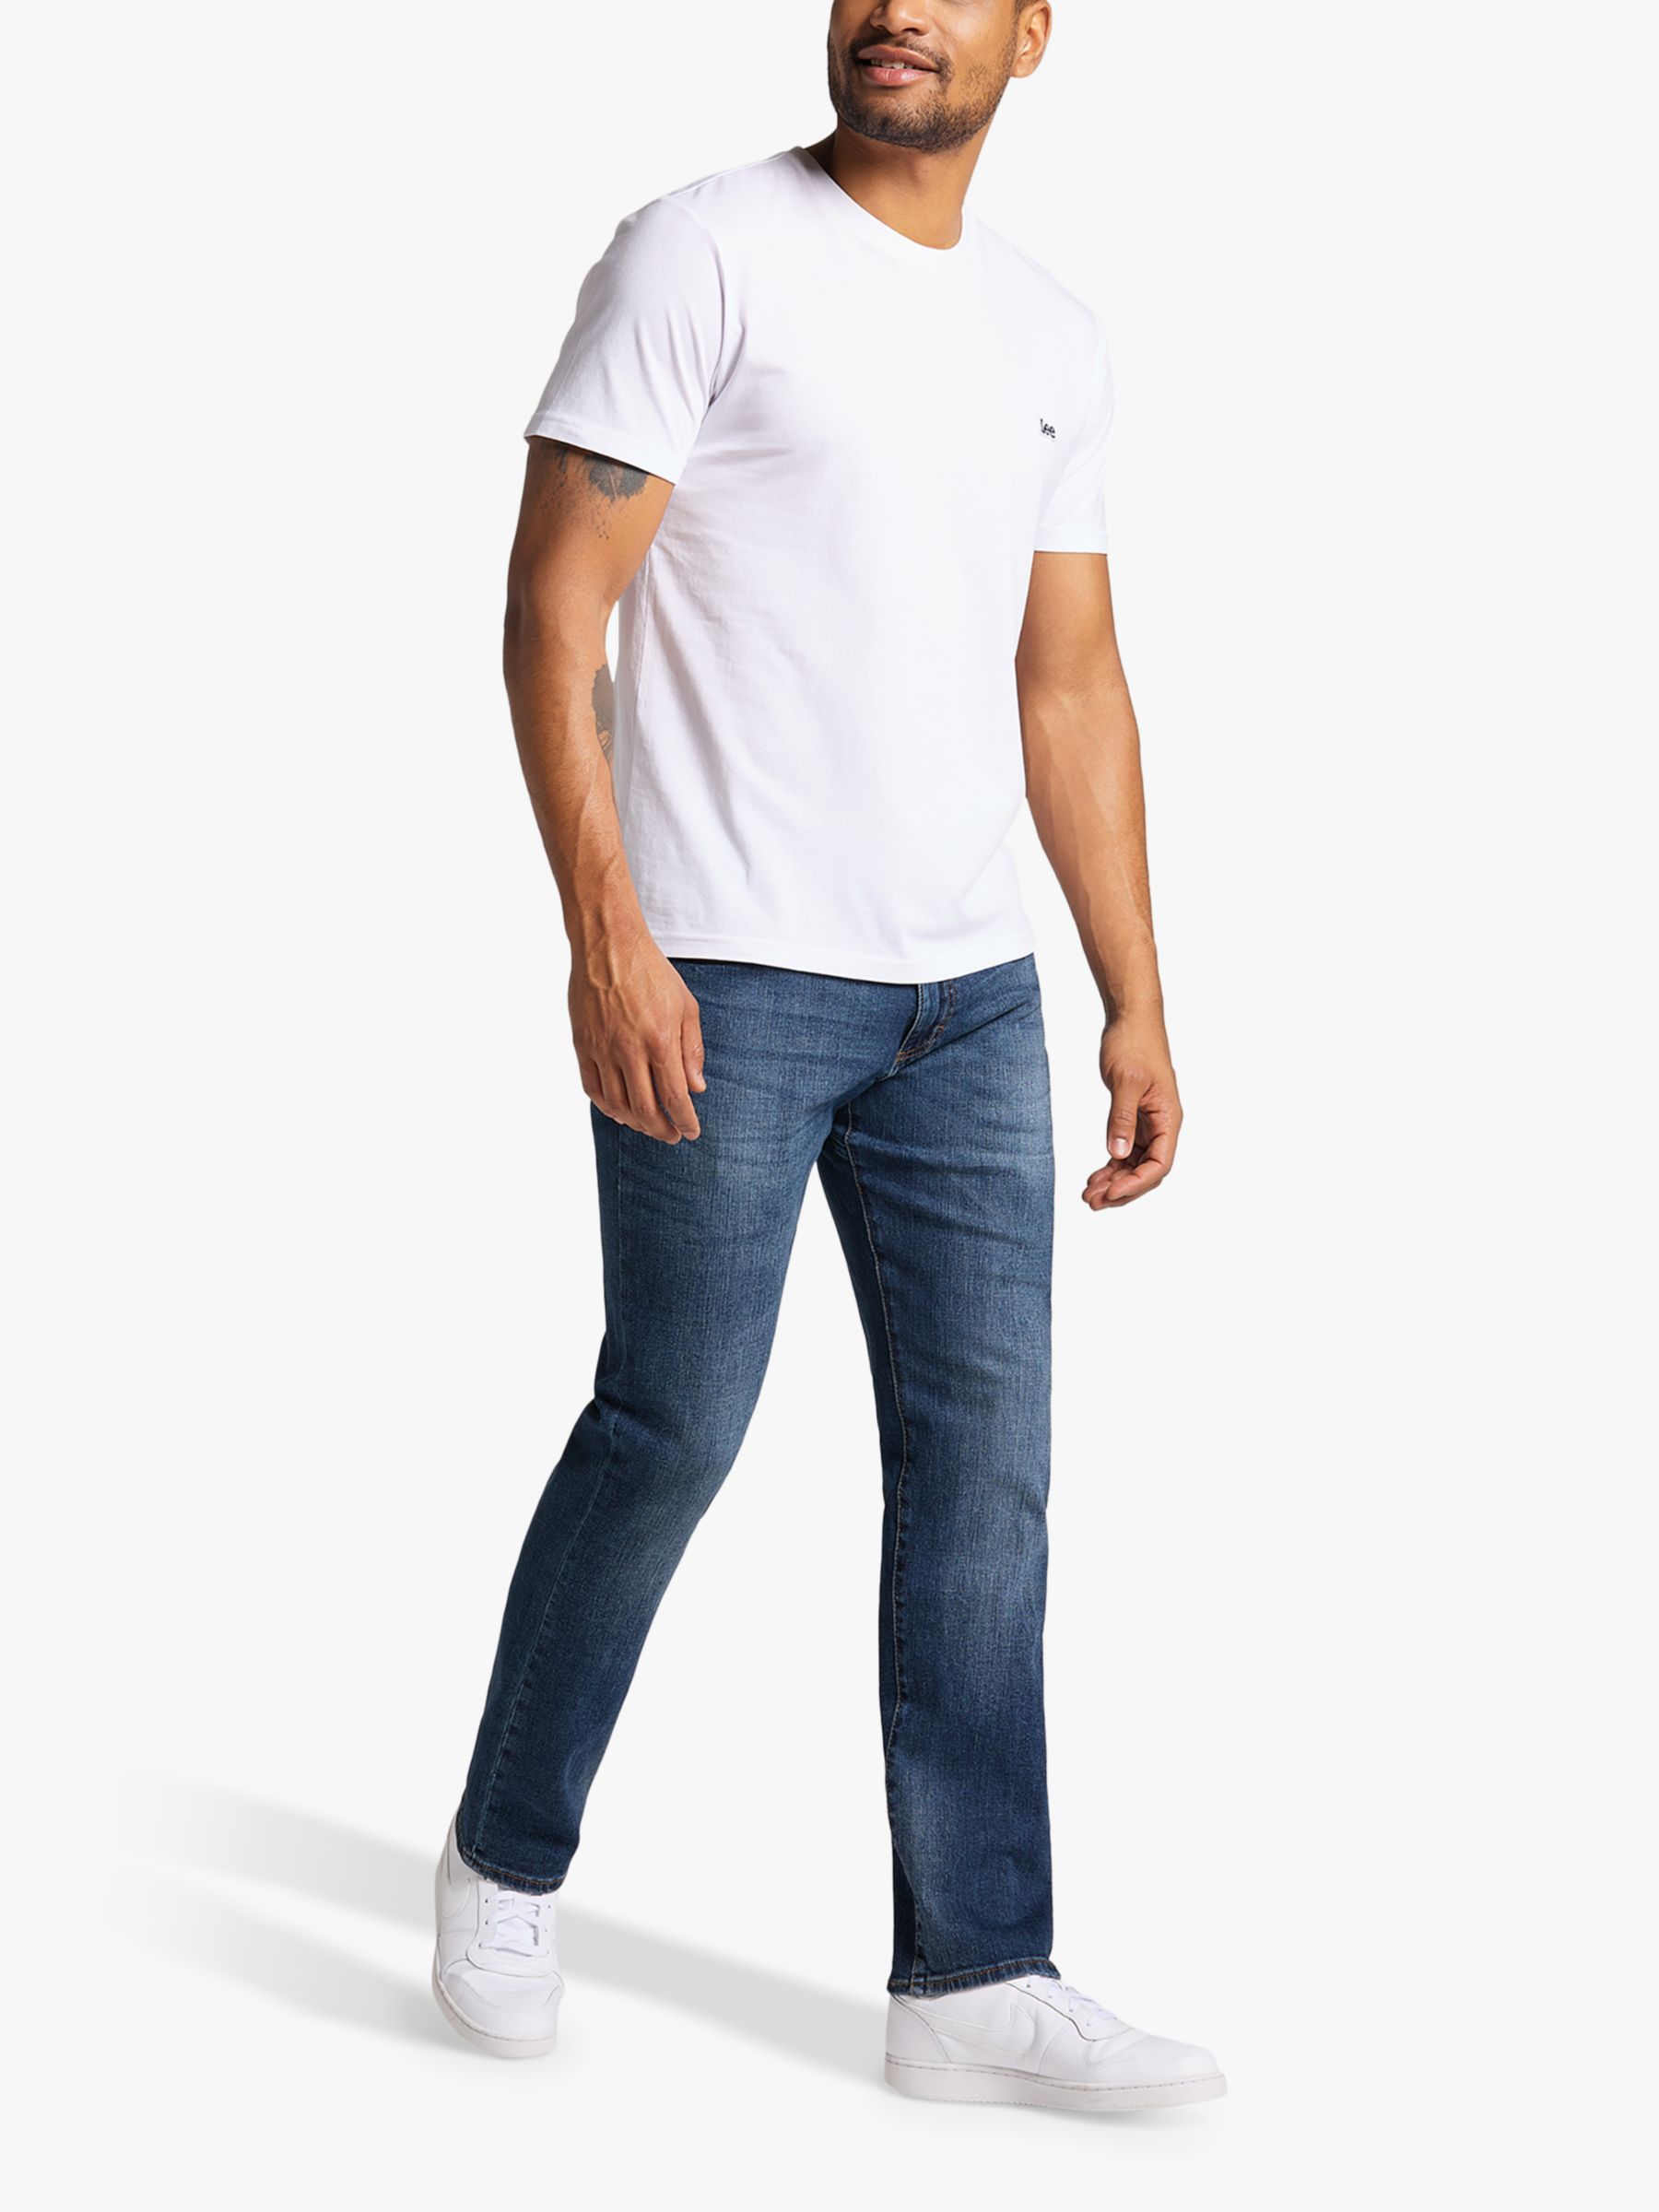 Buy Lee Maddox Straight Fit Denim Jeans, Blue Online at johnlewis.com